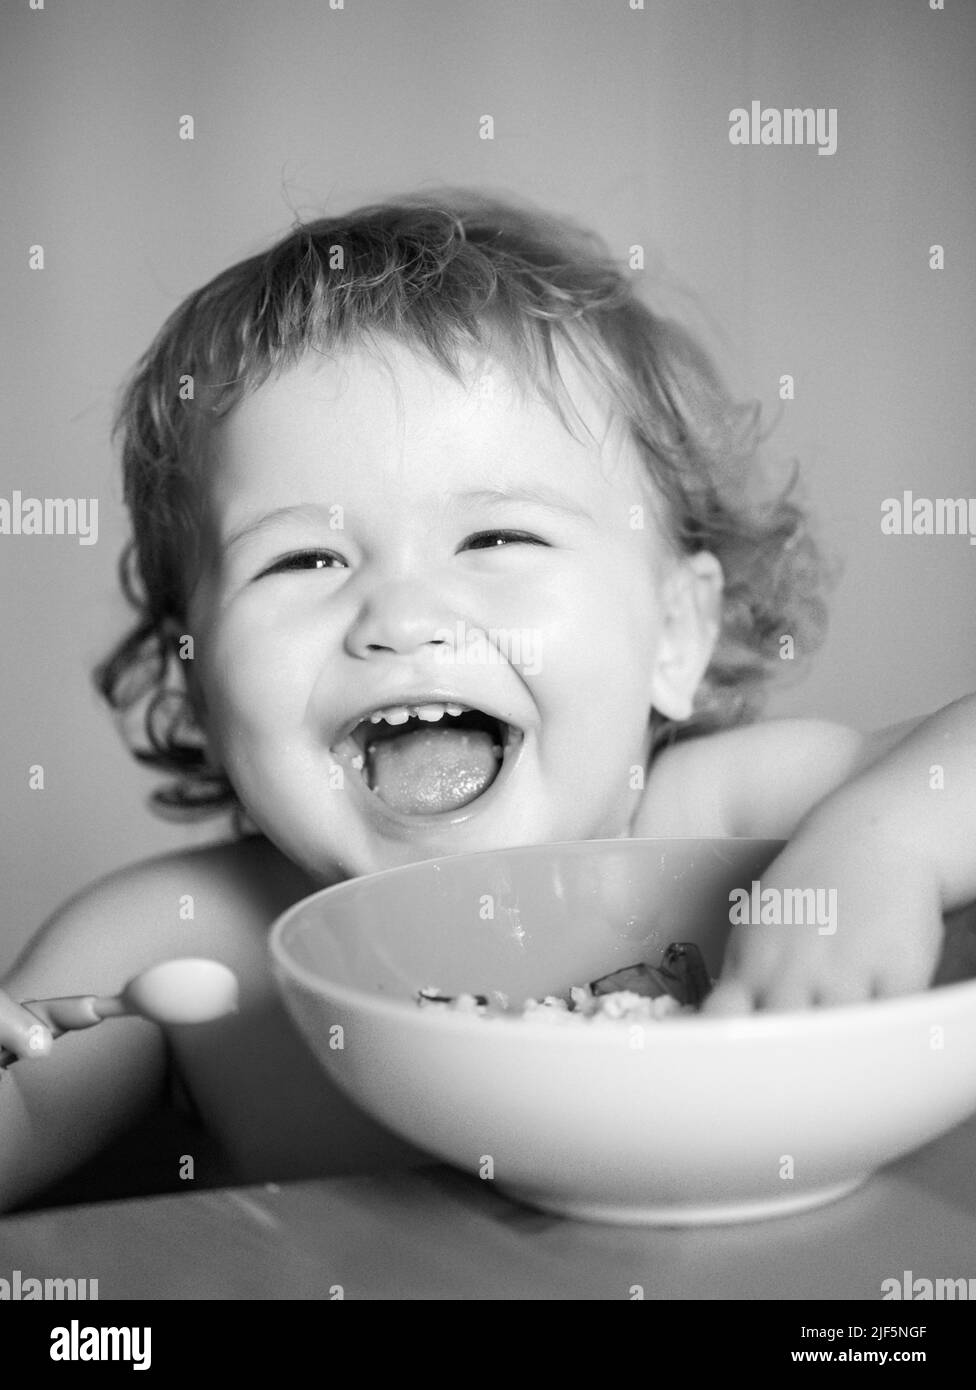 Launching child eat. Smiling baby eating food. Family, food, child ...